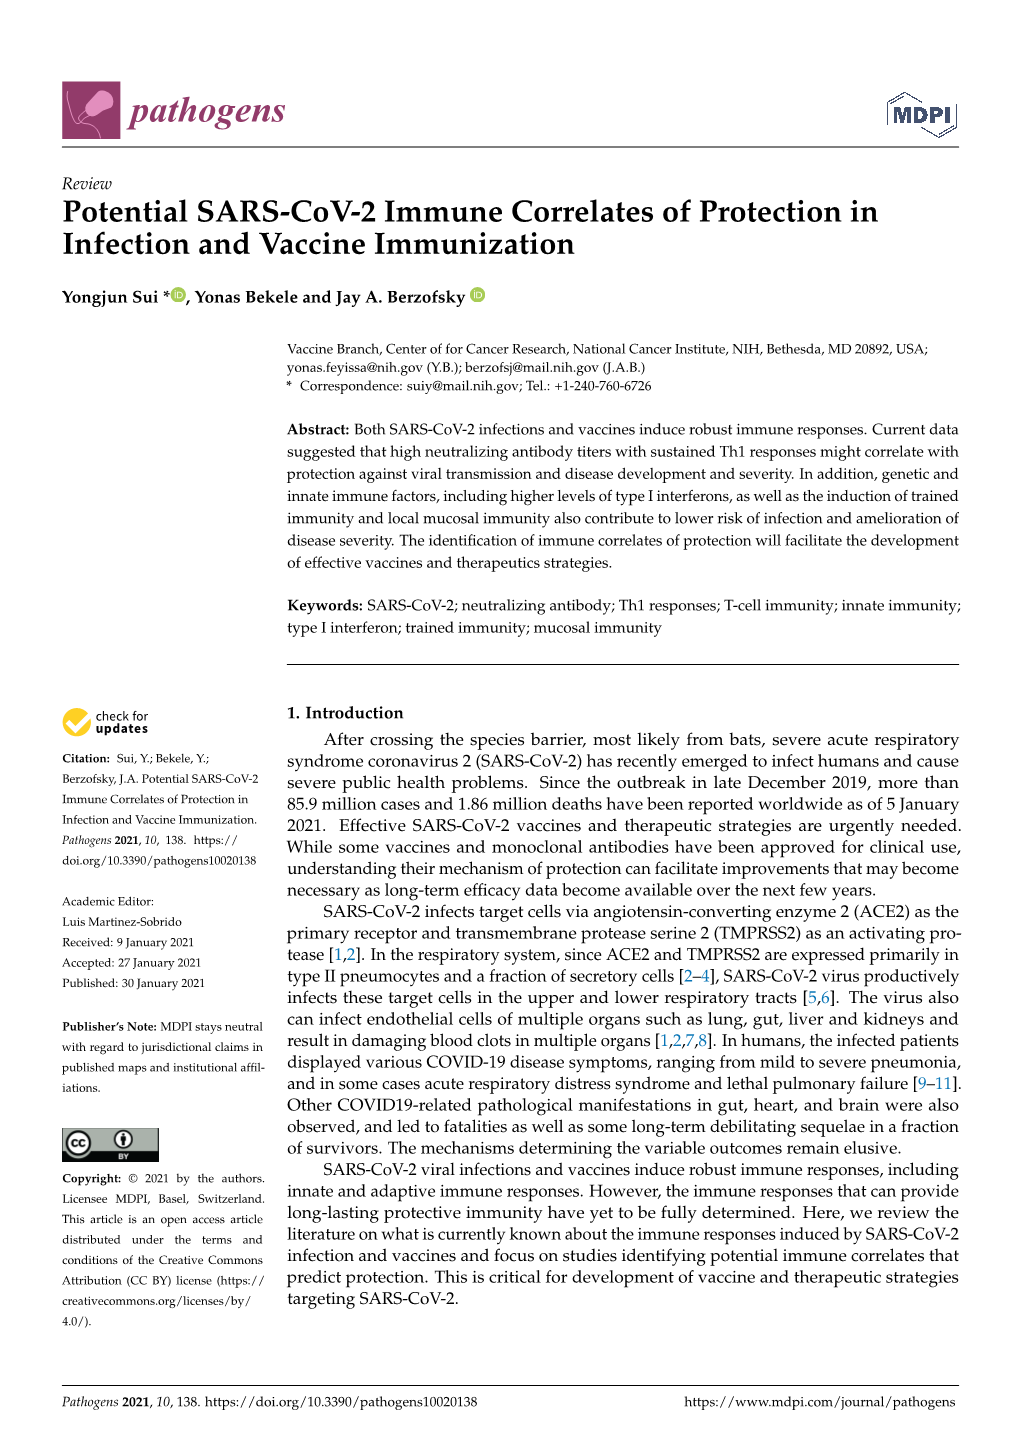 Potential SARS-Cov-2 Immune Correlates of Protection in Infection and Vaccine Immunization